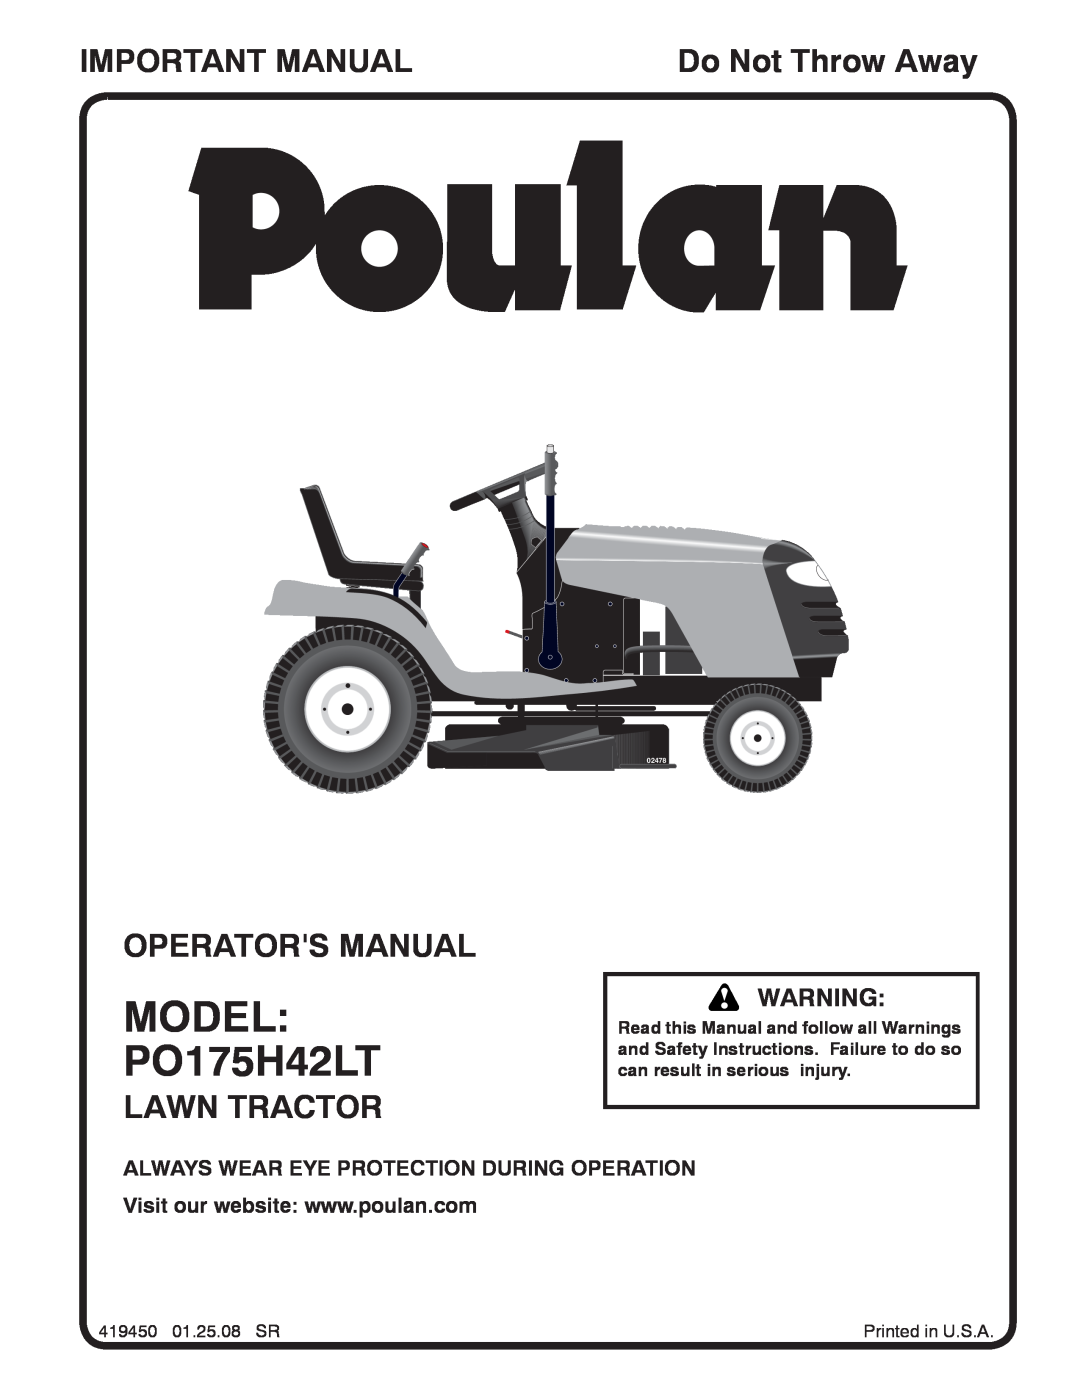 Poulan 419450 manual MODEL PO175H42LT, Important Manual, Operators Manual, Lawn Tractor, Do Not Throw Away, 02478 